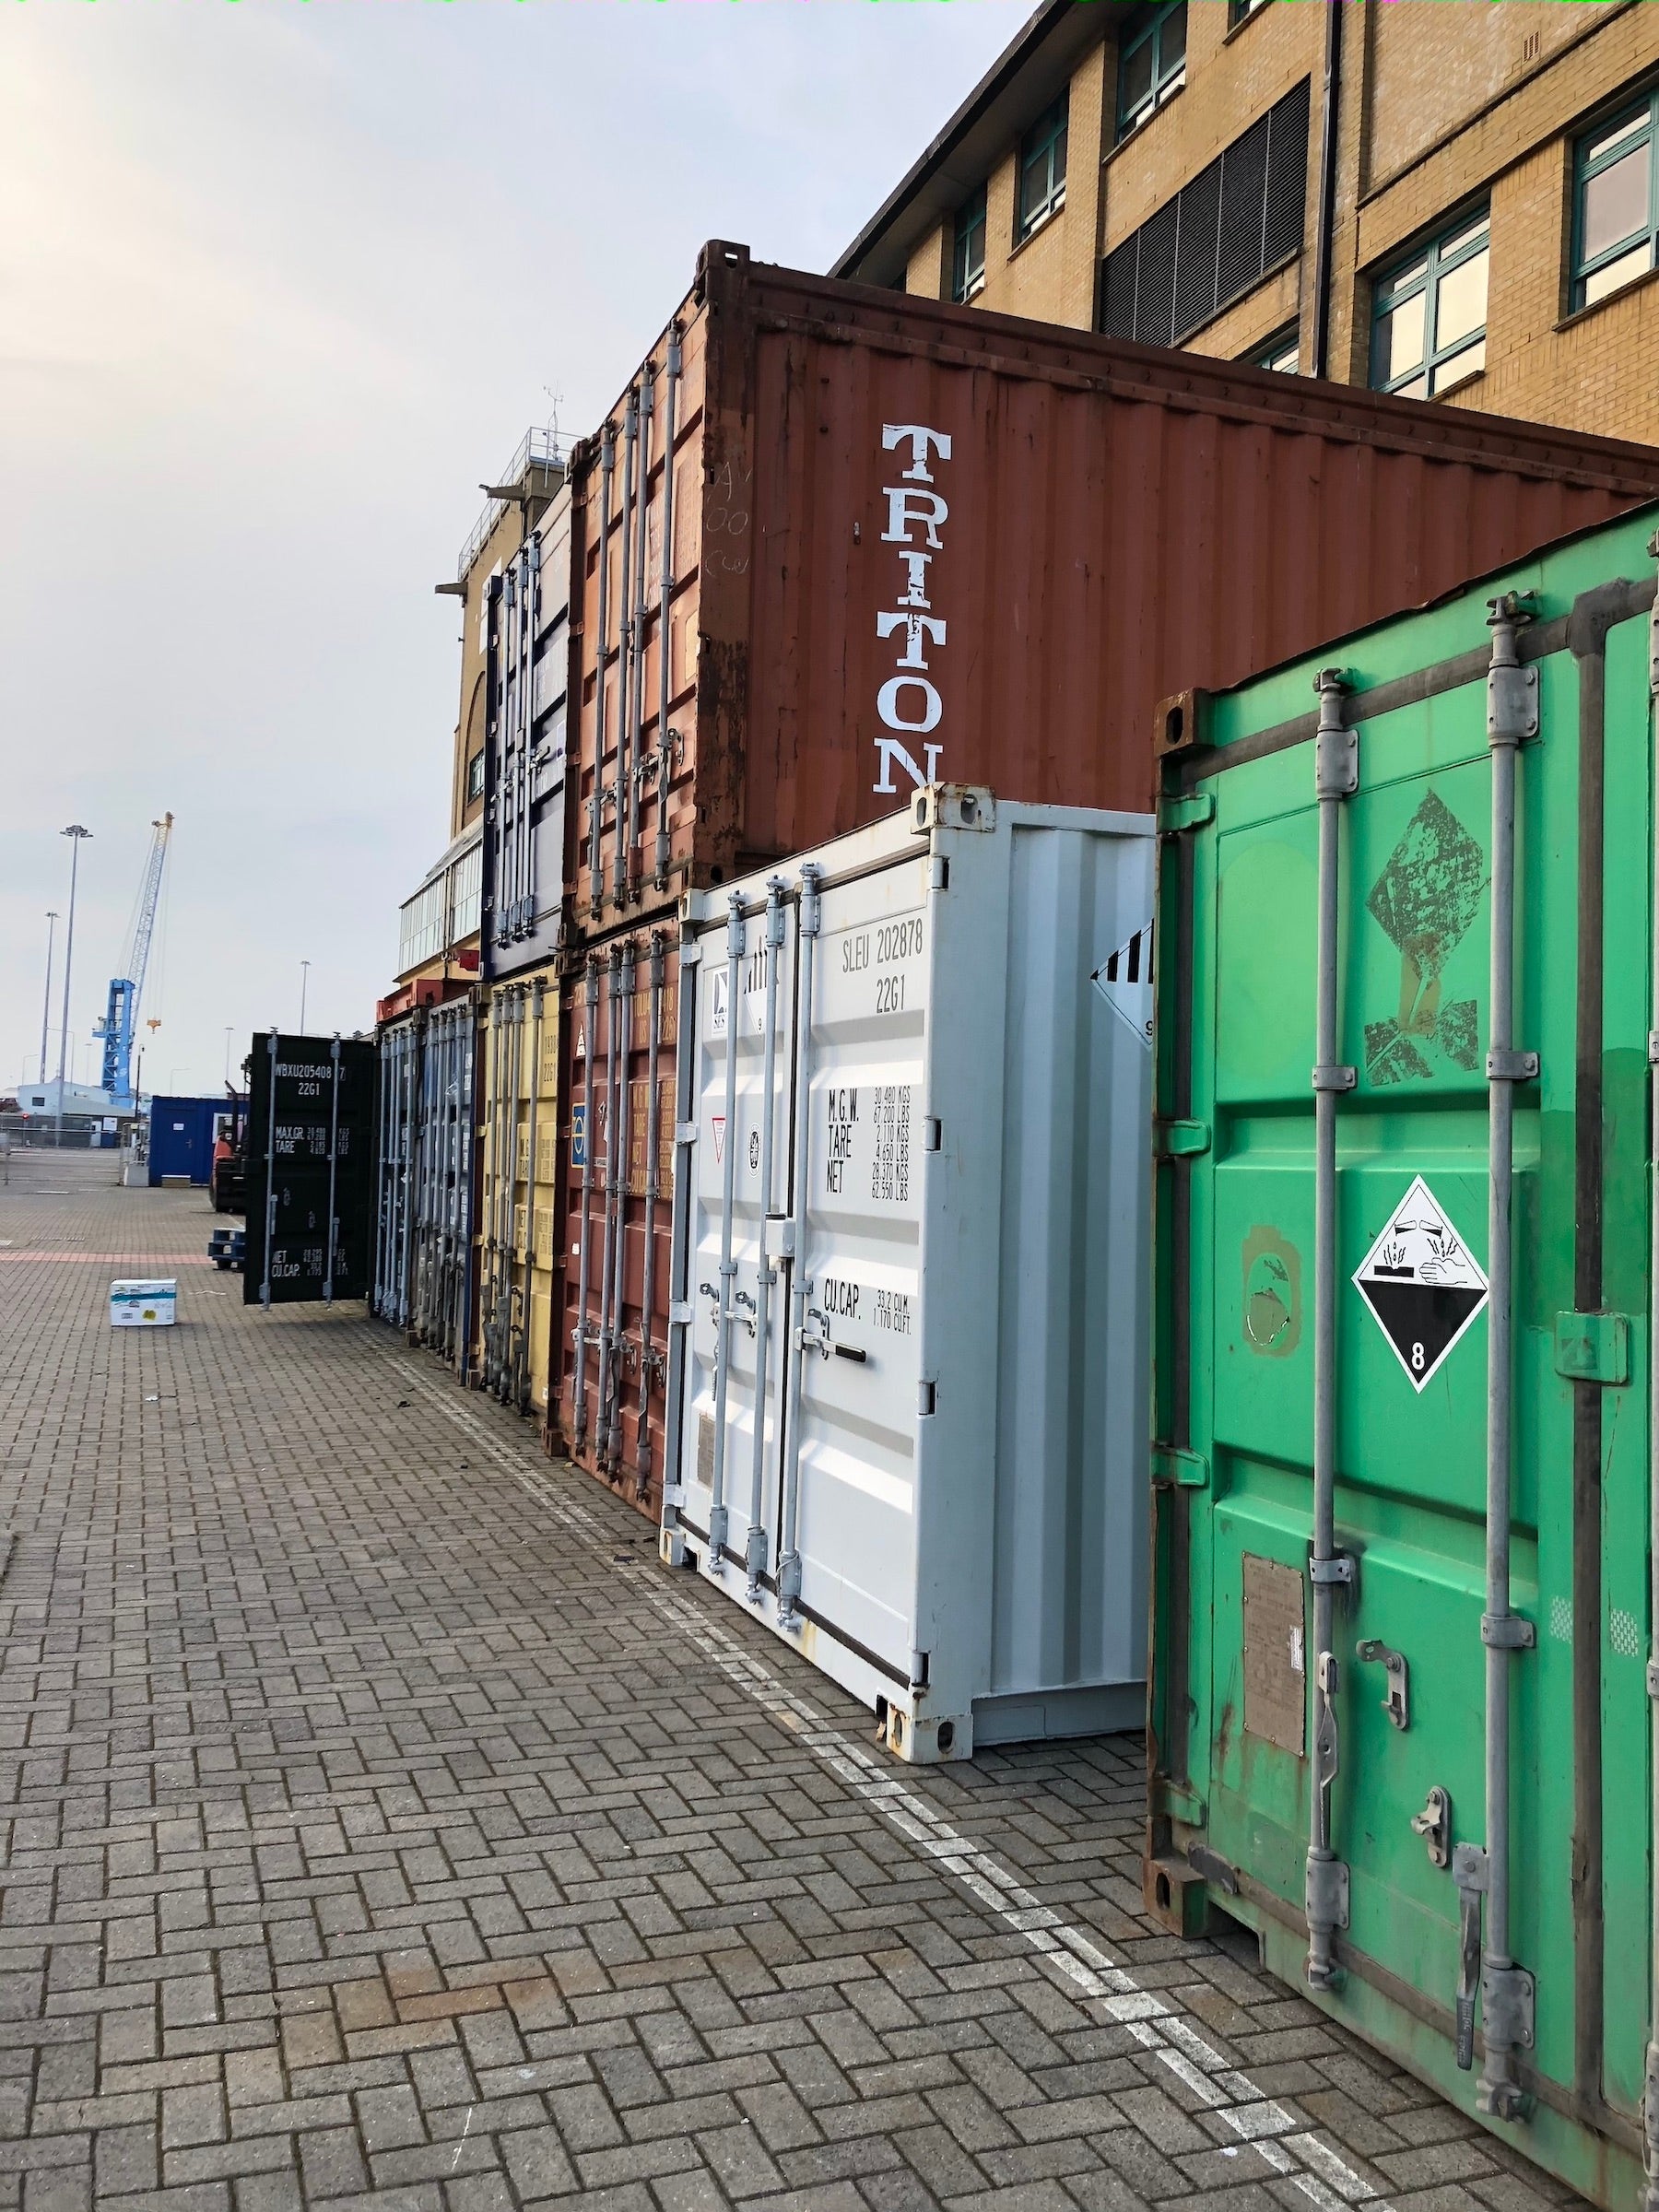 Several metal shipping containers on a pier; they are painted differnet colors: white, green, brown, yellow and blue.